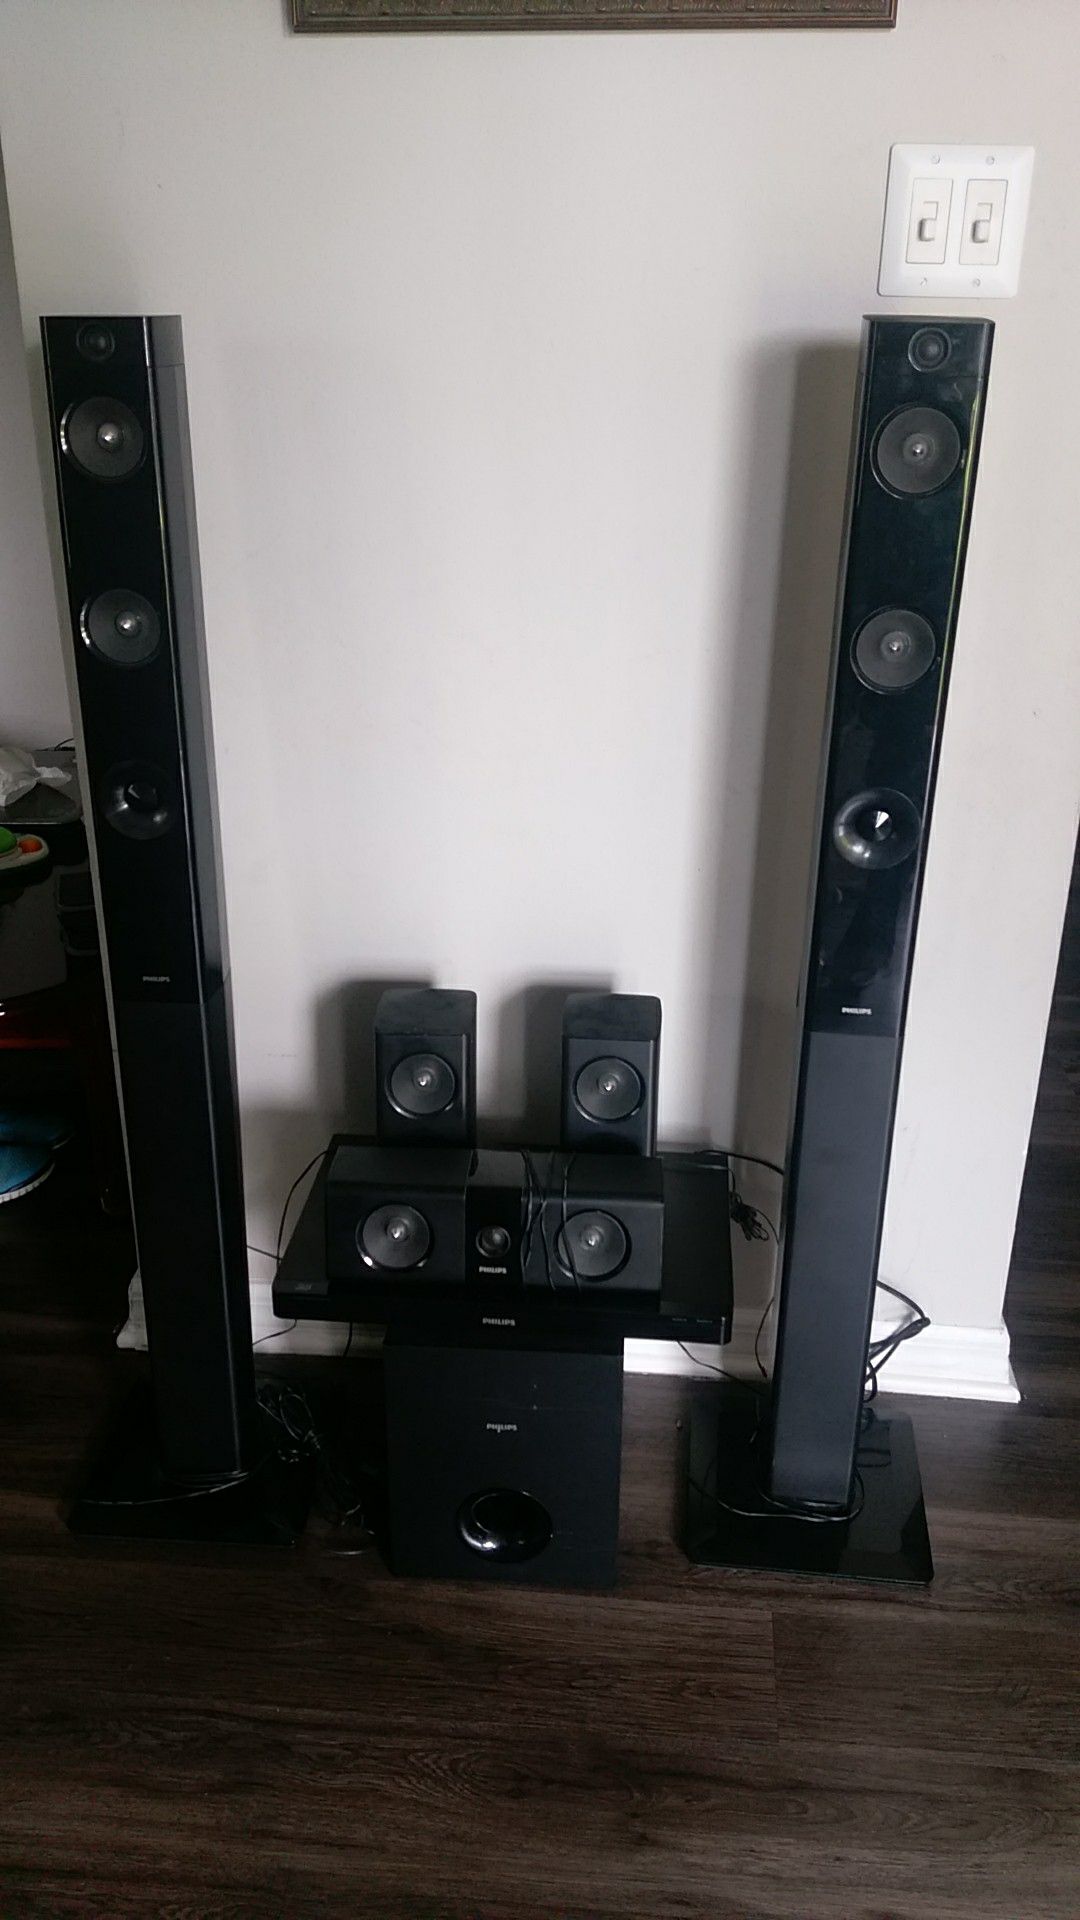 Home Theater System Model HTB5544D/F7 for in Winter Park, FL - OfferUp